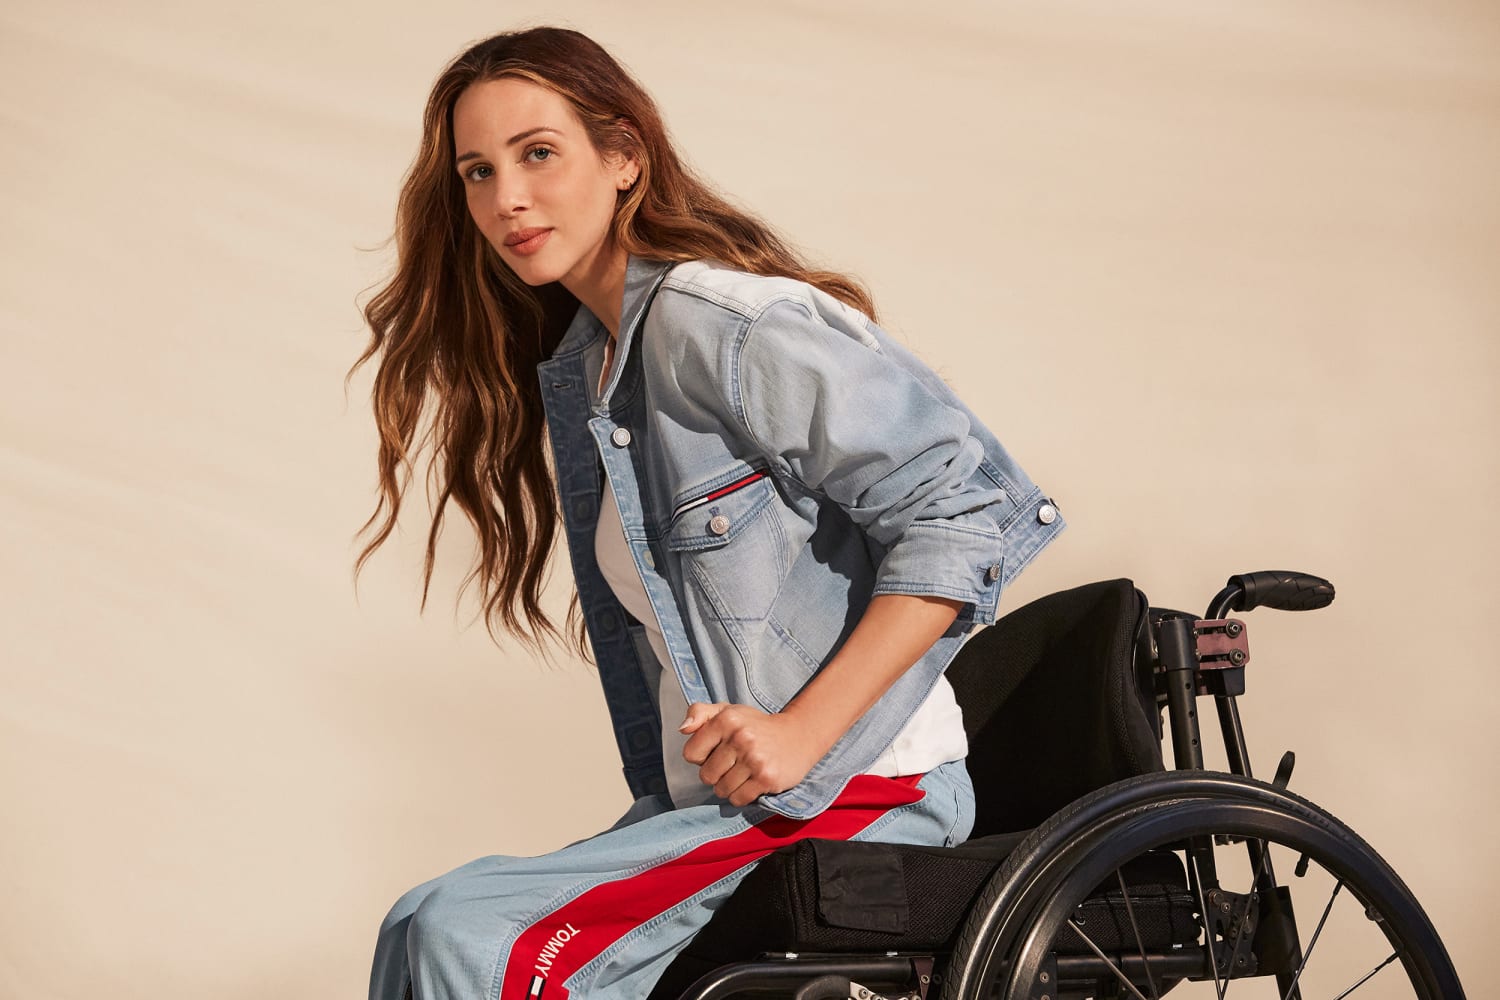 Tommy Hilfiger's new campaign celebrates strength in disability